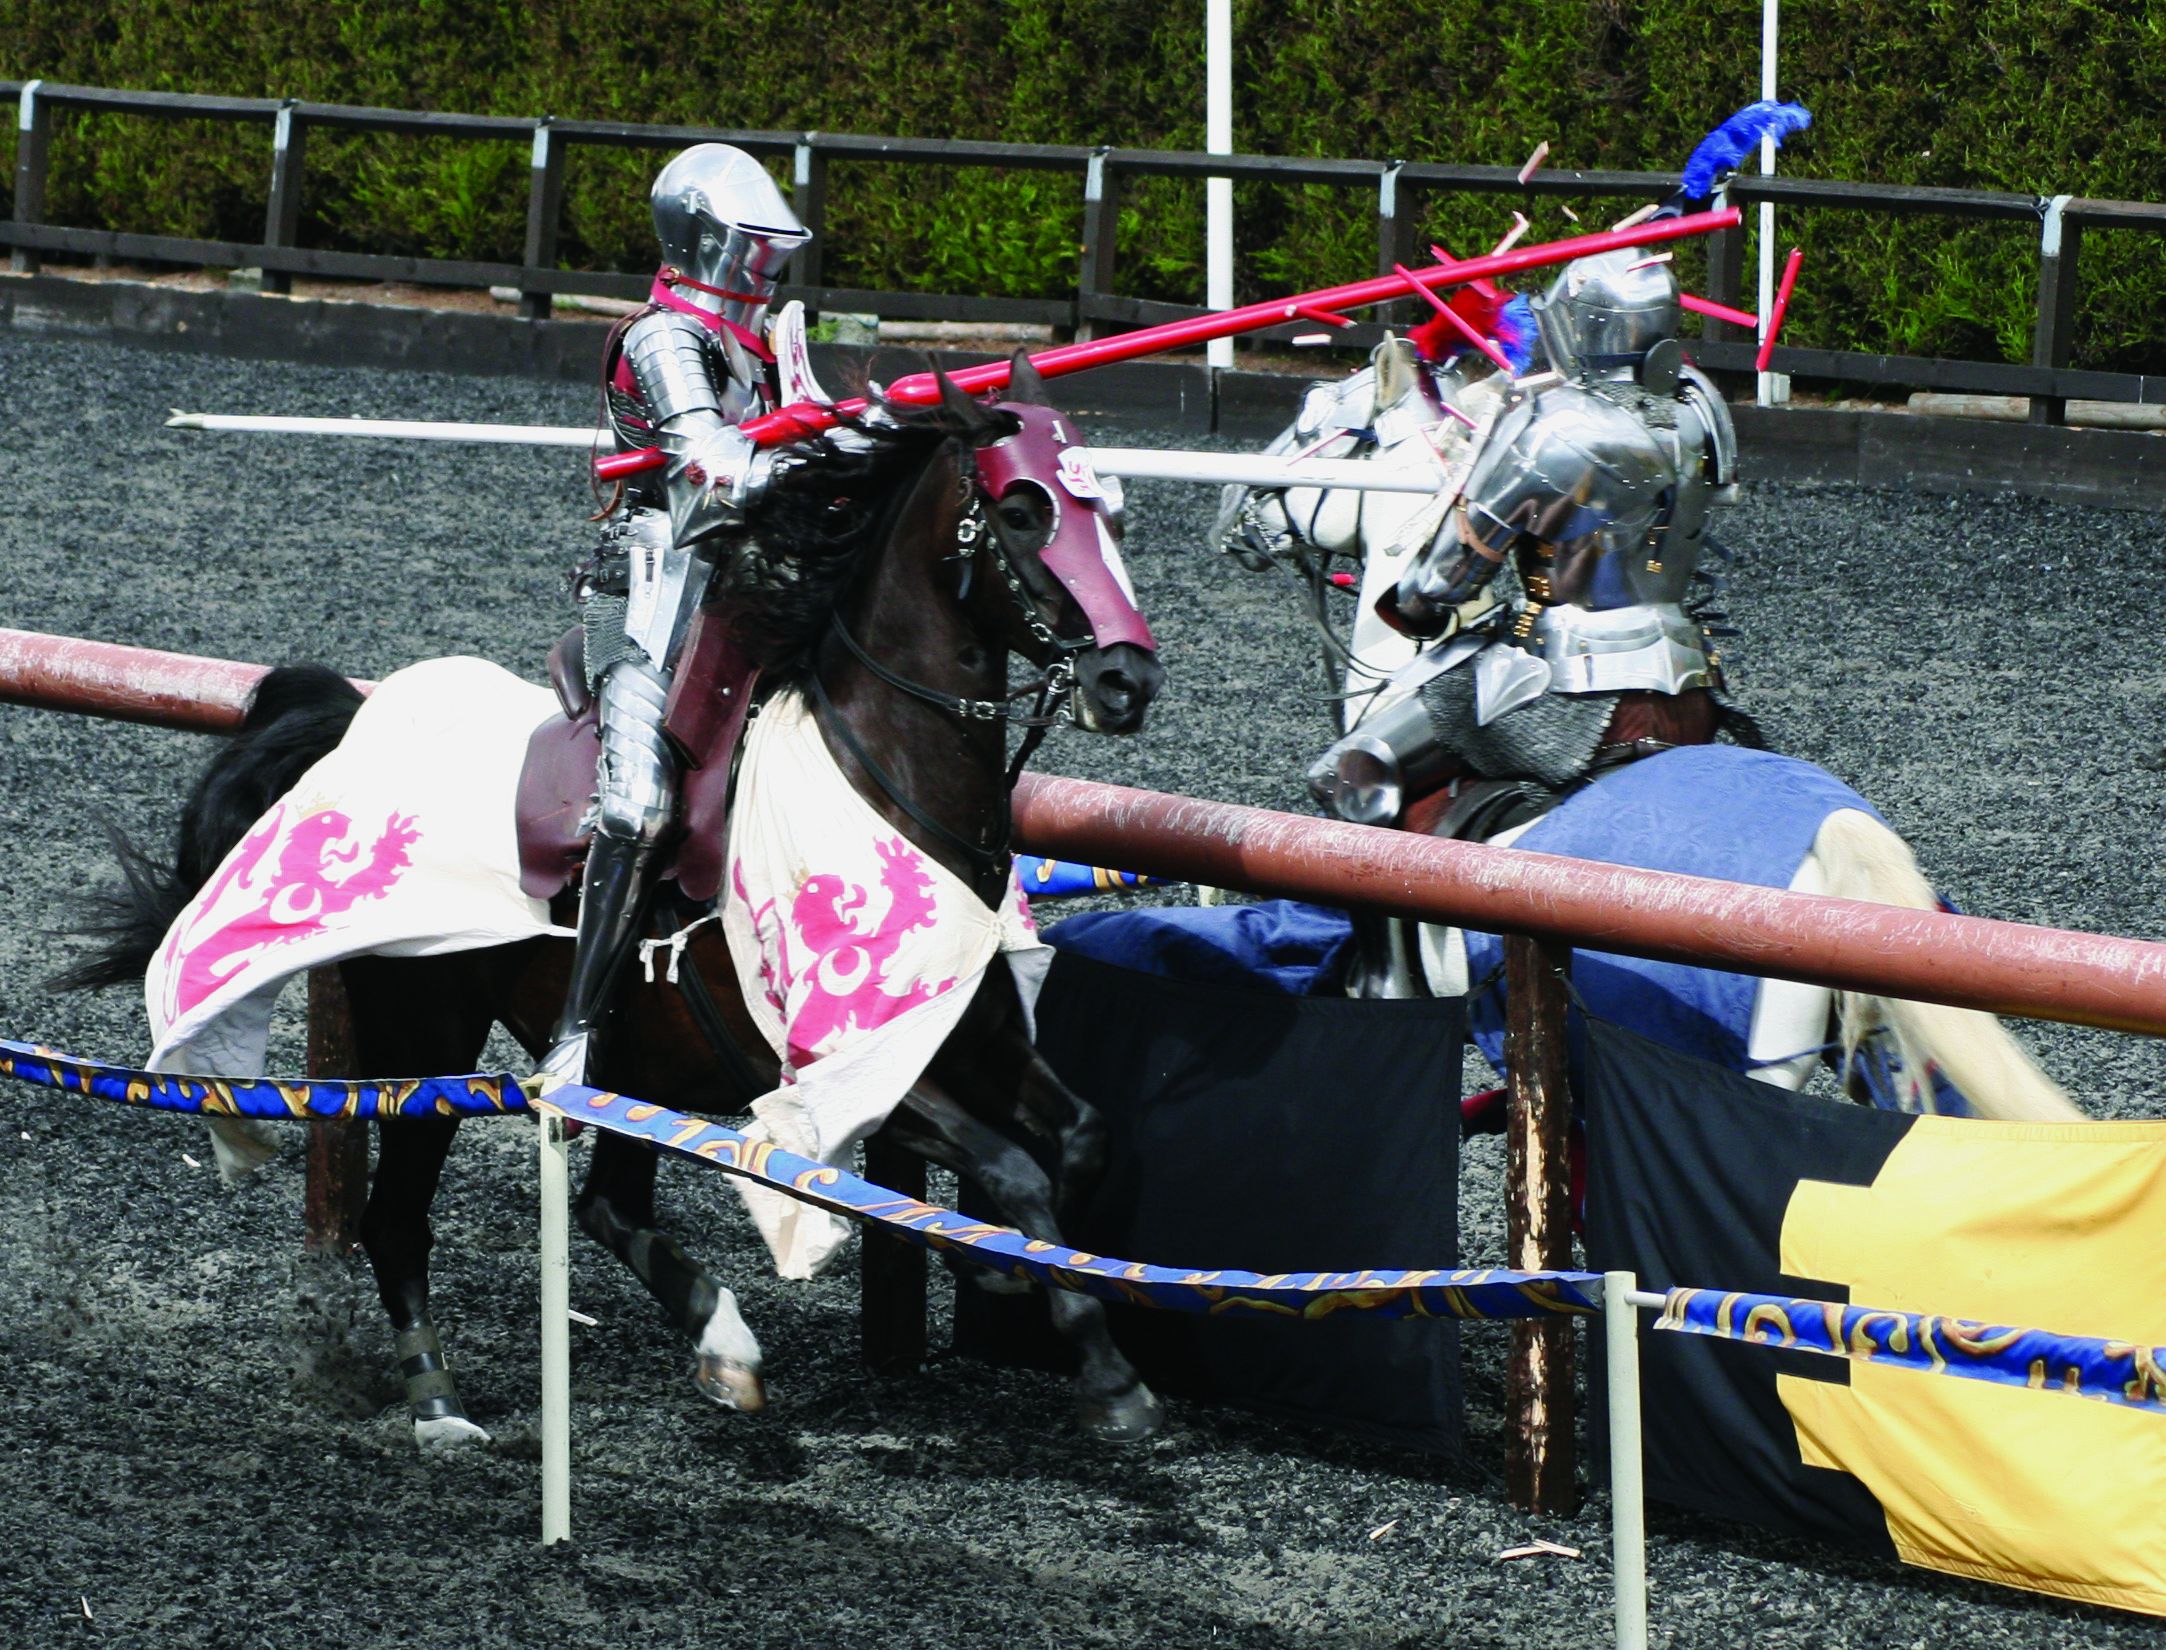 Graham Turner (left) displays his skill at riding a horse in full armor as he clashes with his opponent at a competitive jousting tournament.